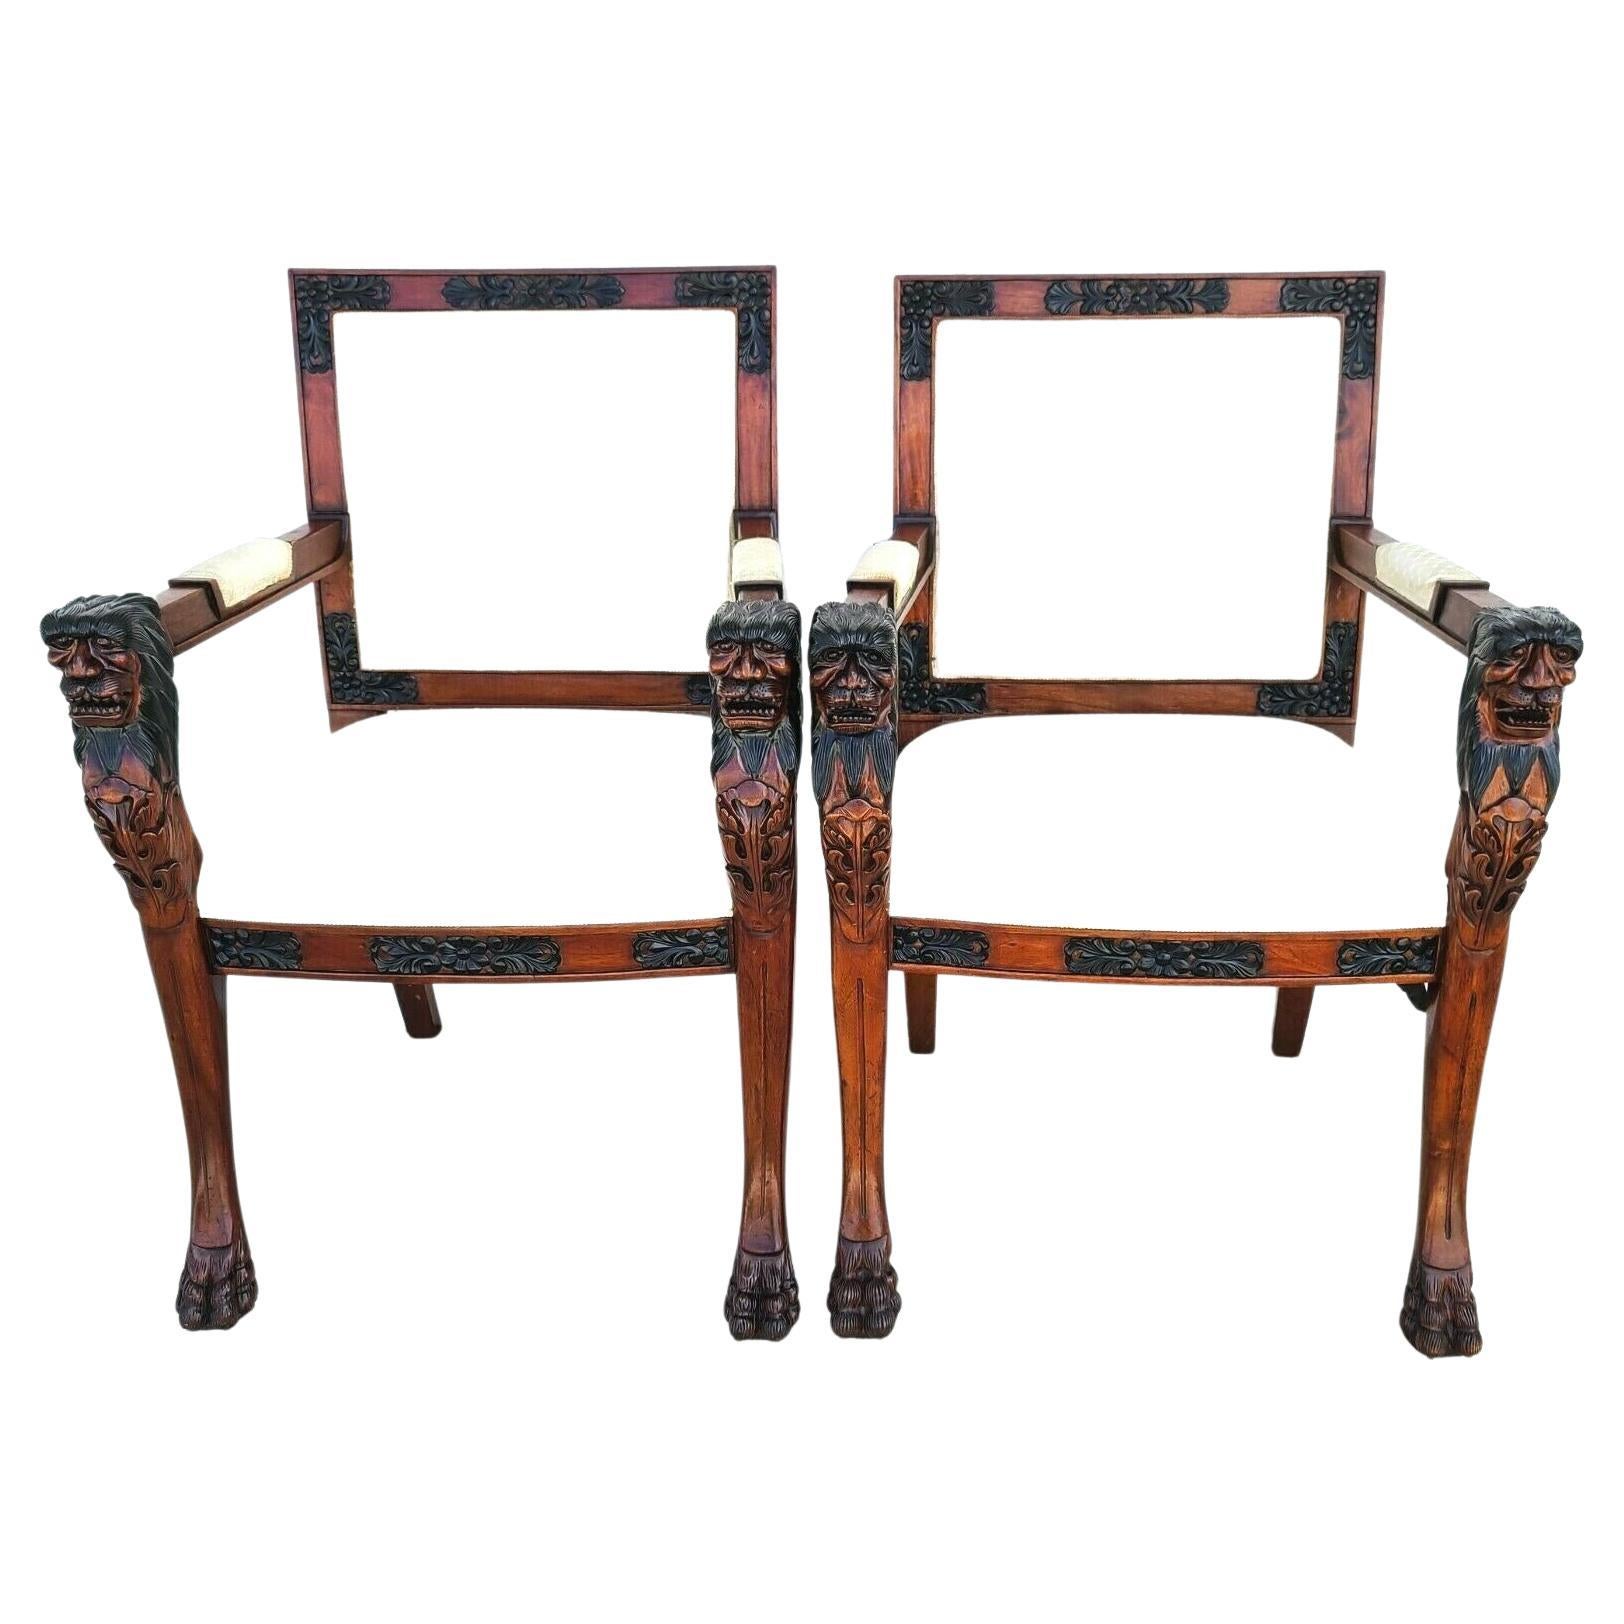 For FULL item description be sure to click on CONTINUE READING at the bottom of this listing.

Offering One Of Our Recent Palm Beach Estate Fine Furniture Acquisitions Of A Pair of Hand Carved Mahogany Lions Head Armchairs

Approximate